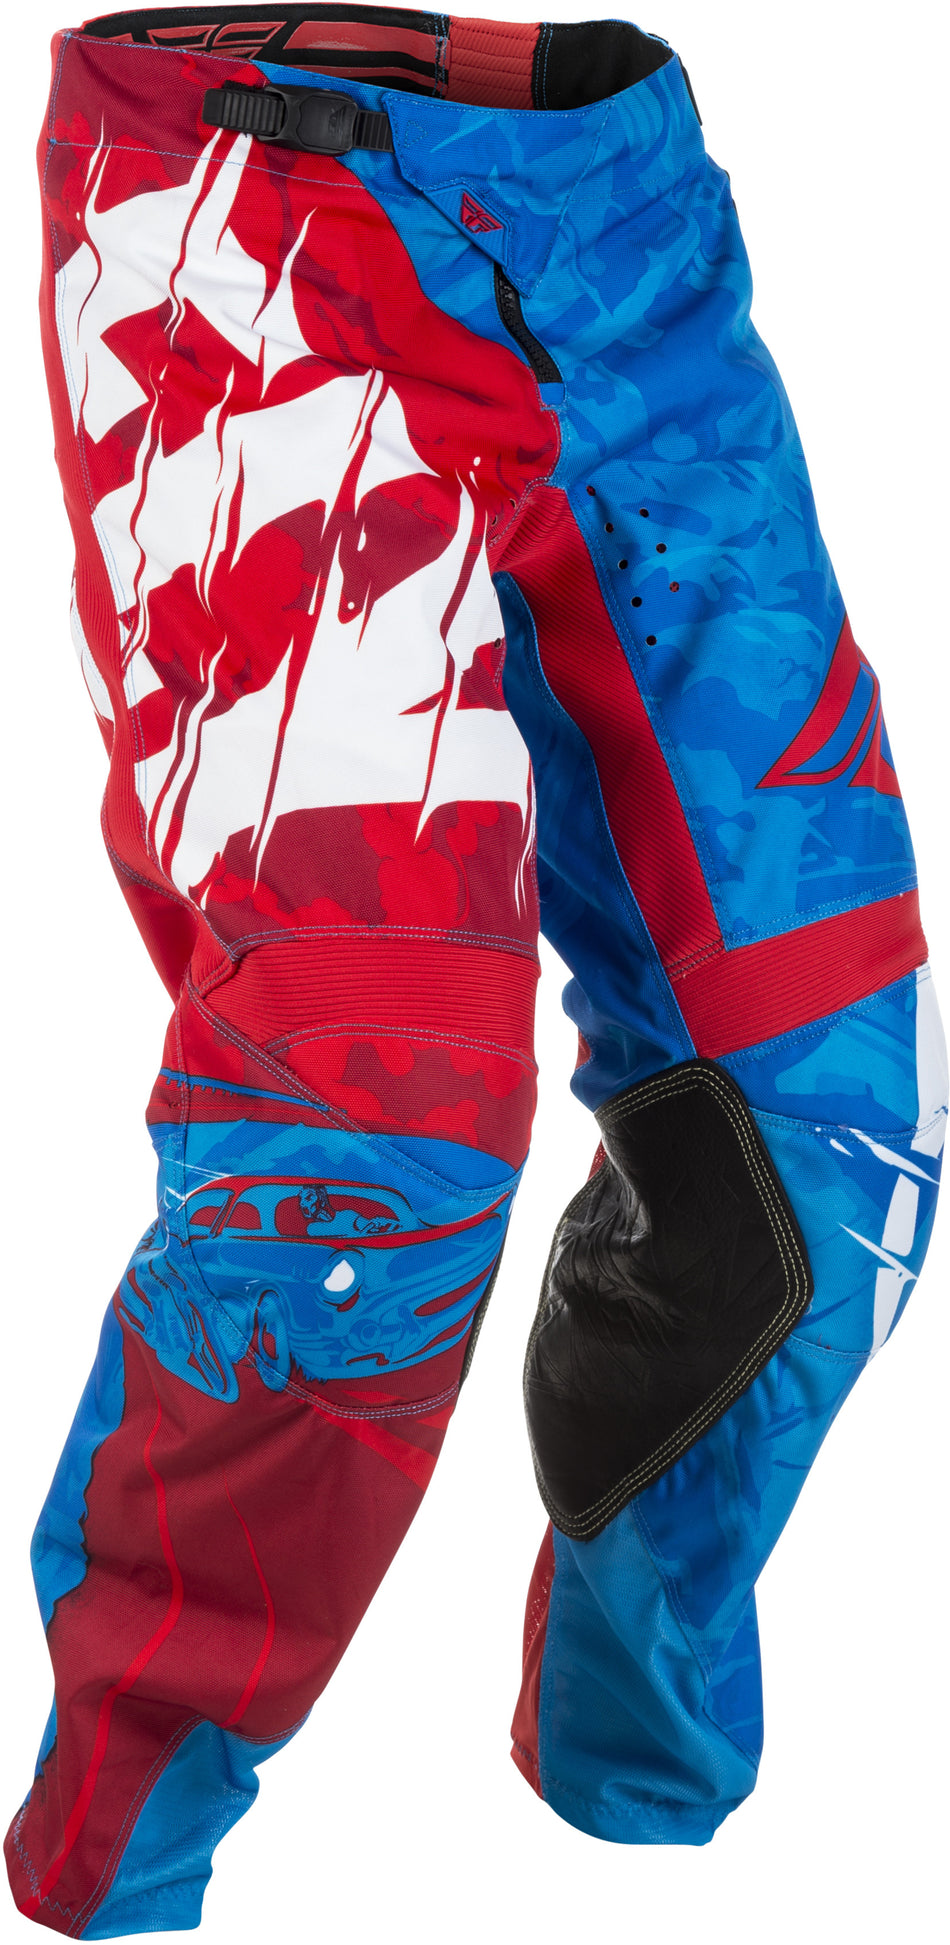 FLY RACING Kinetic Outlaw Pants Red/Blue Sz 28 371-53228